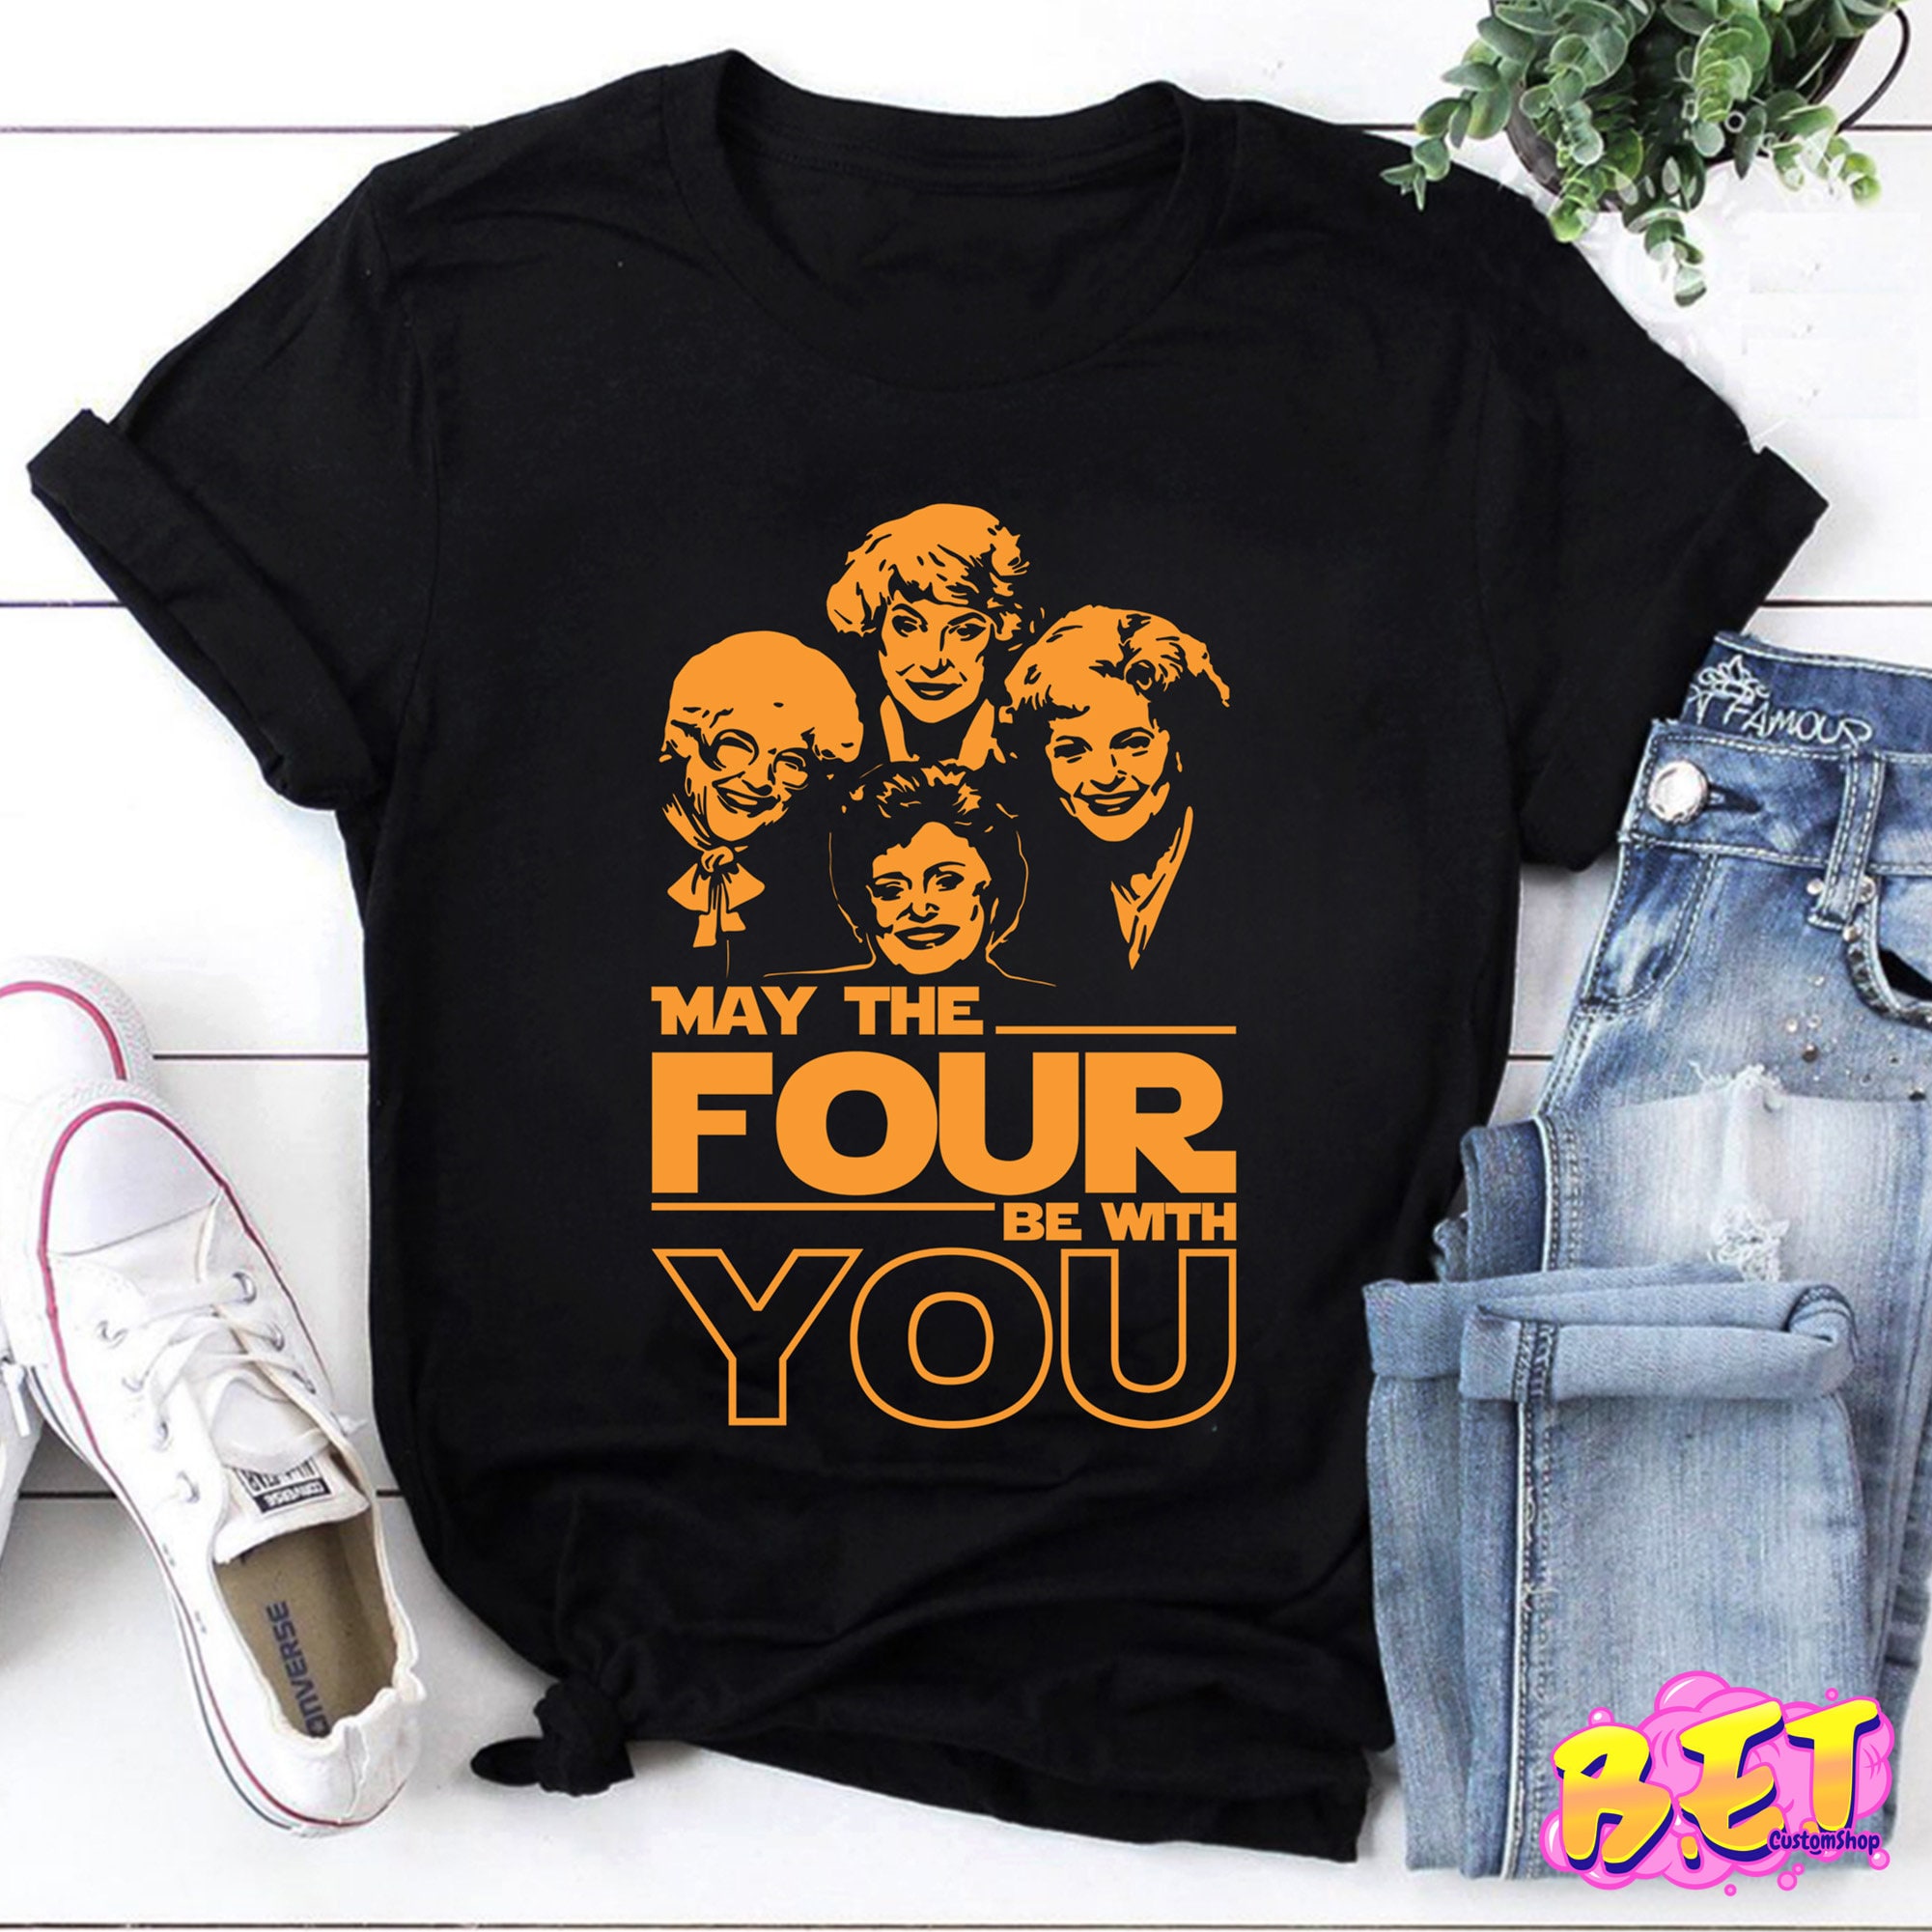 Discover Retro May the 4 Be With You The Stay Golden T-Shirt, Stay Golden Shirt